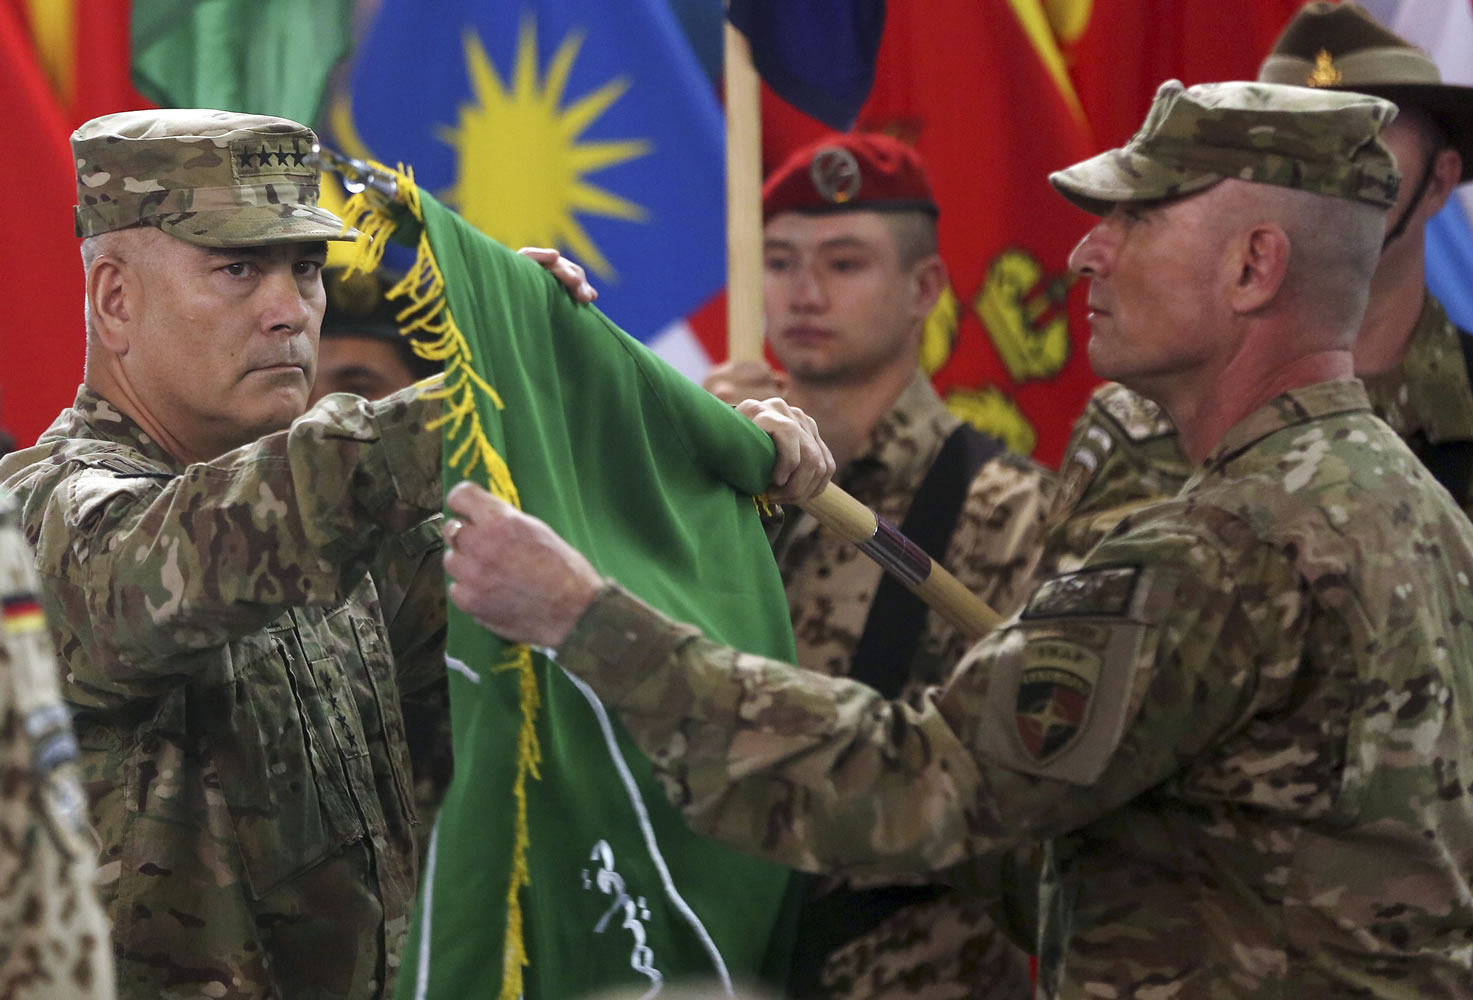 Commander of the International Security Assistance Force, Gen. John Campbell, left, and Command Sgt. Maj. Delbert Byers open the &quot;Resolute Support&quot; flag Sunday during a ceremony at the ISAF headquarters in Kabul, Afghanistan. The United States and NATO formally ended their war in Afghanistan on Sunday with the ceremony at their military headquarters in Kabul as the insurgency they fought for 13 years remains as ferocious and deadly as at any time since the 2001 invasion that unseated the Taliban regime following the Sept.